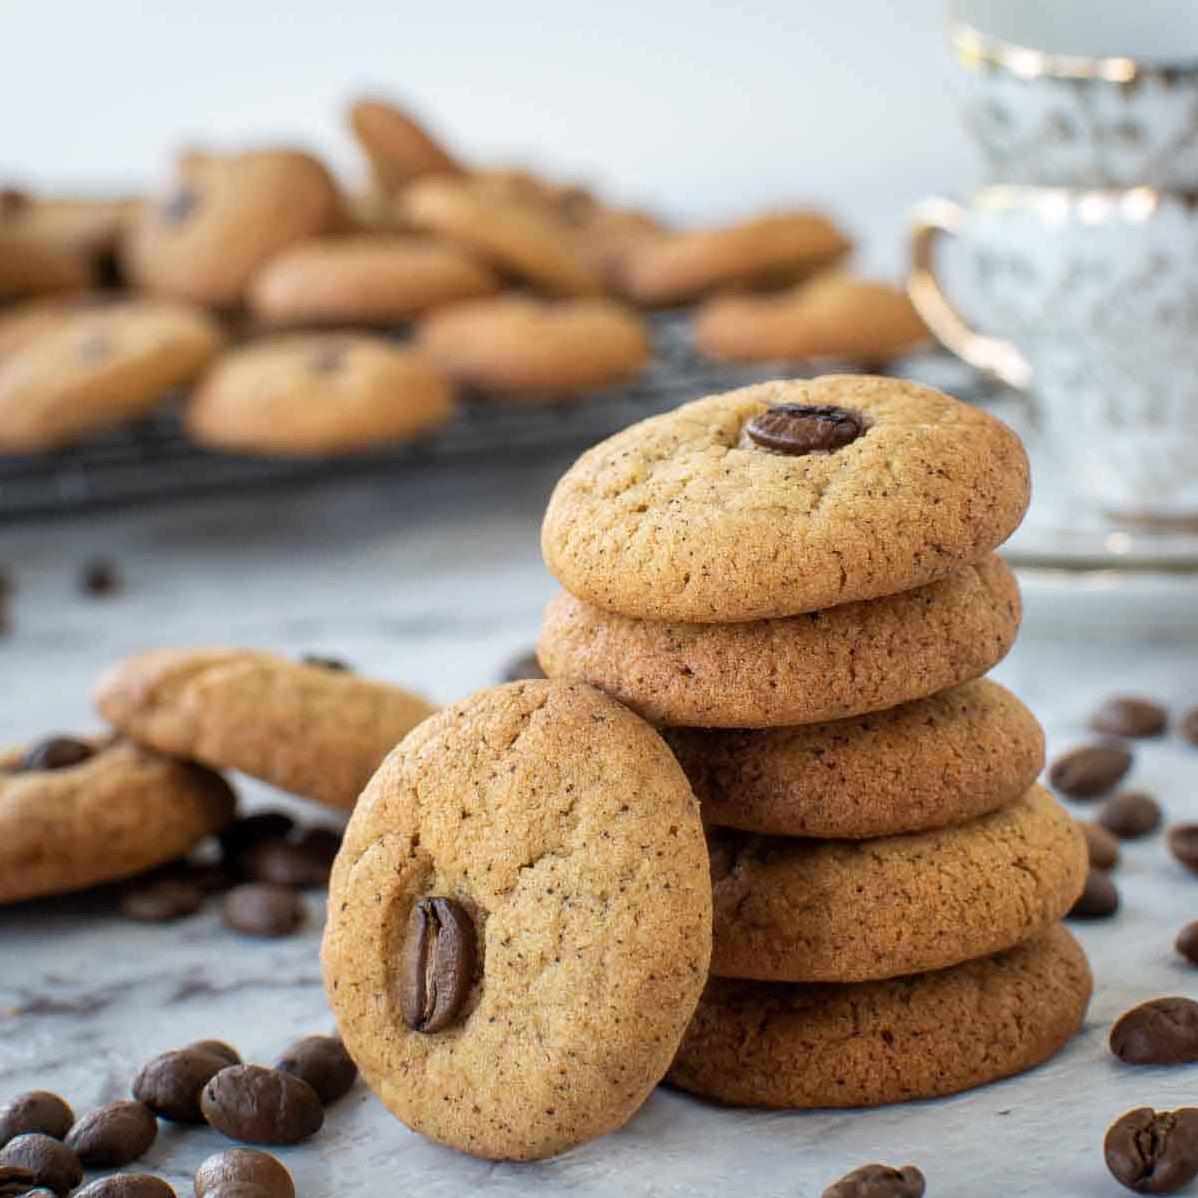  Coffee lovers rejoice! These biscuits were made just for you.